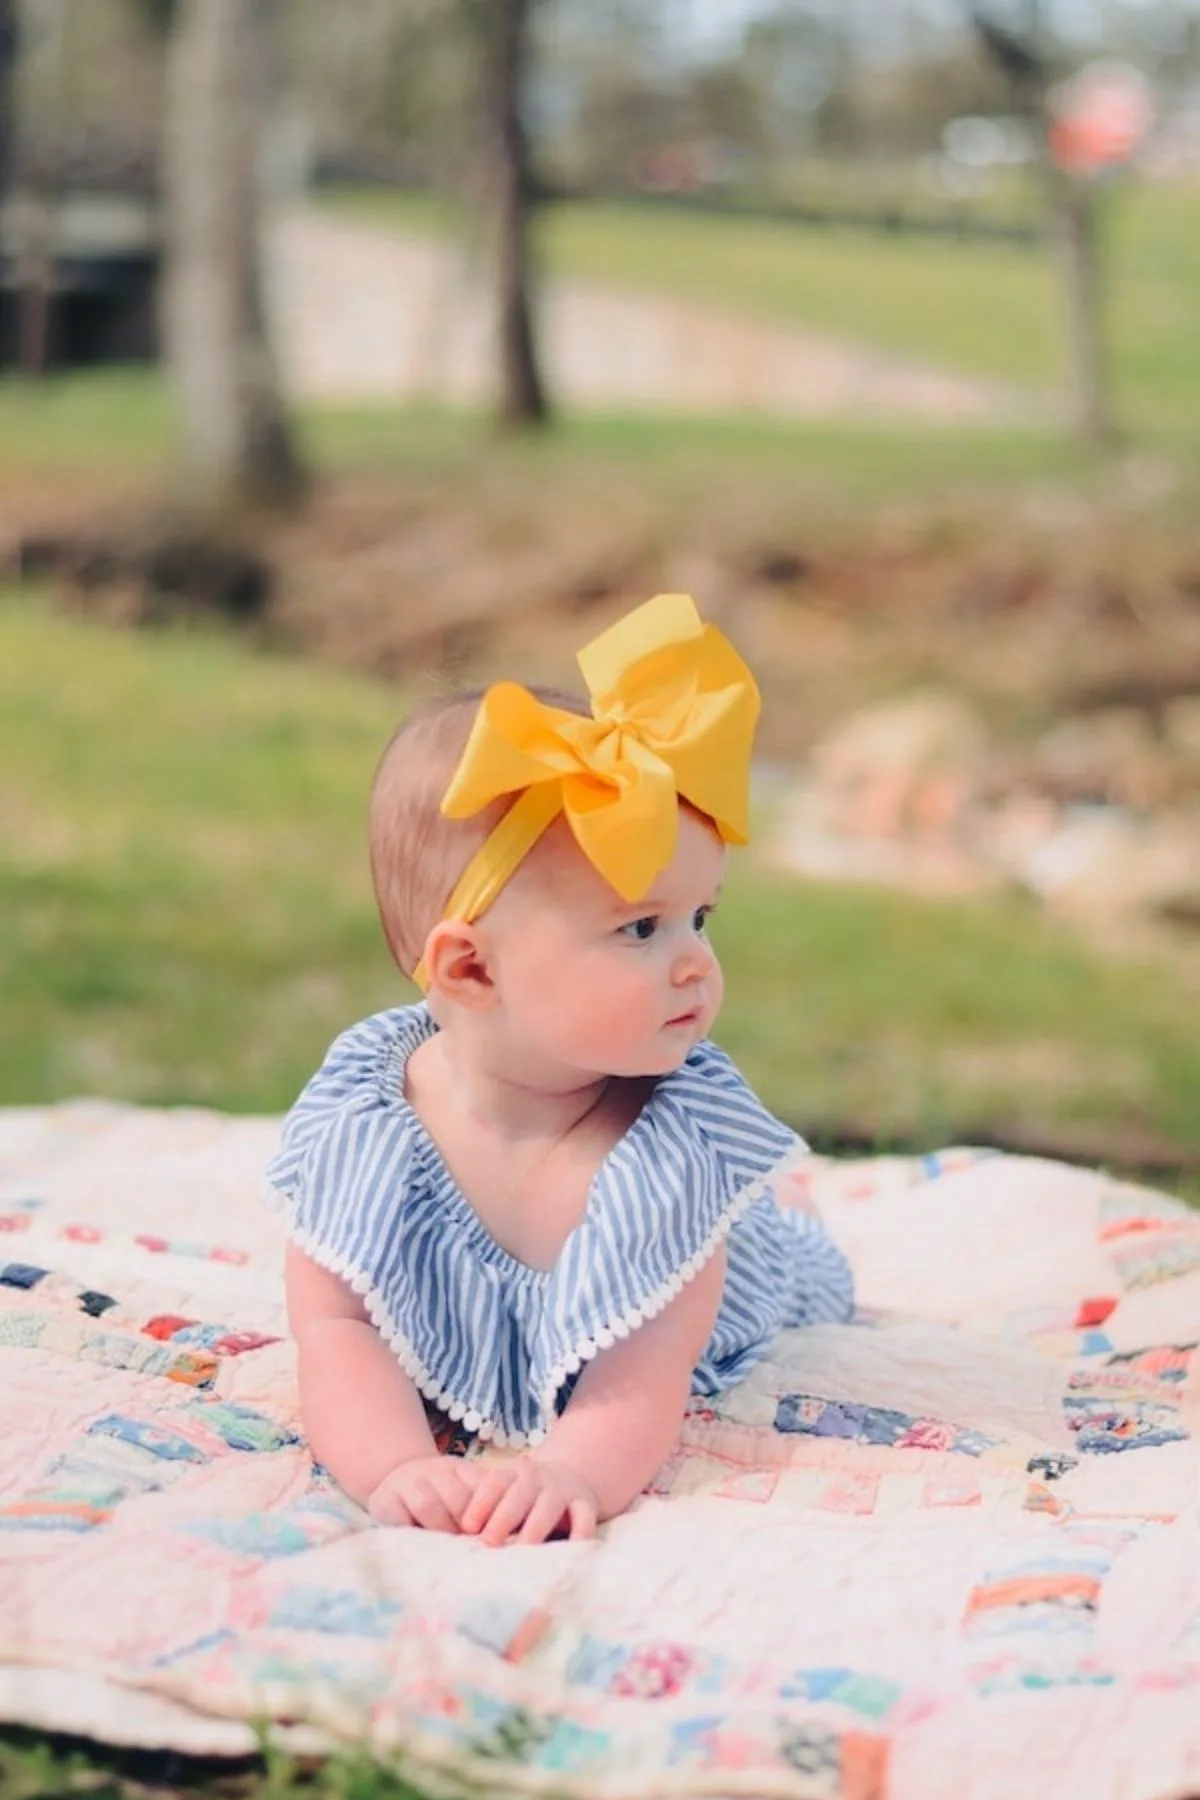 Baby girl with yellow bow and blue striped romper pushes up on patchwork quilt outside.